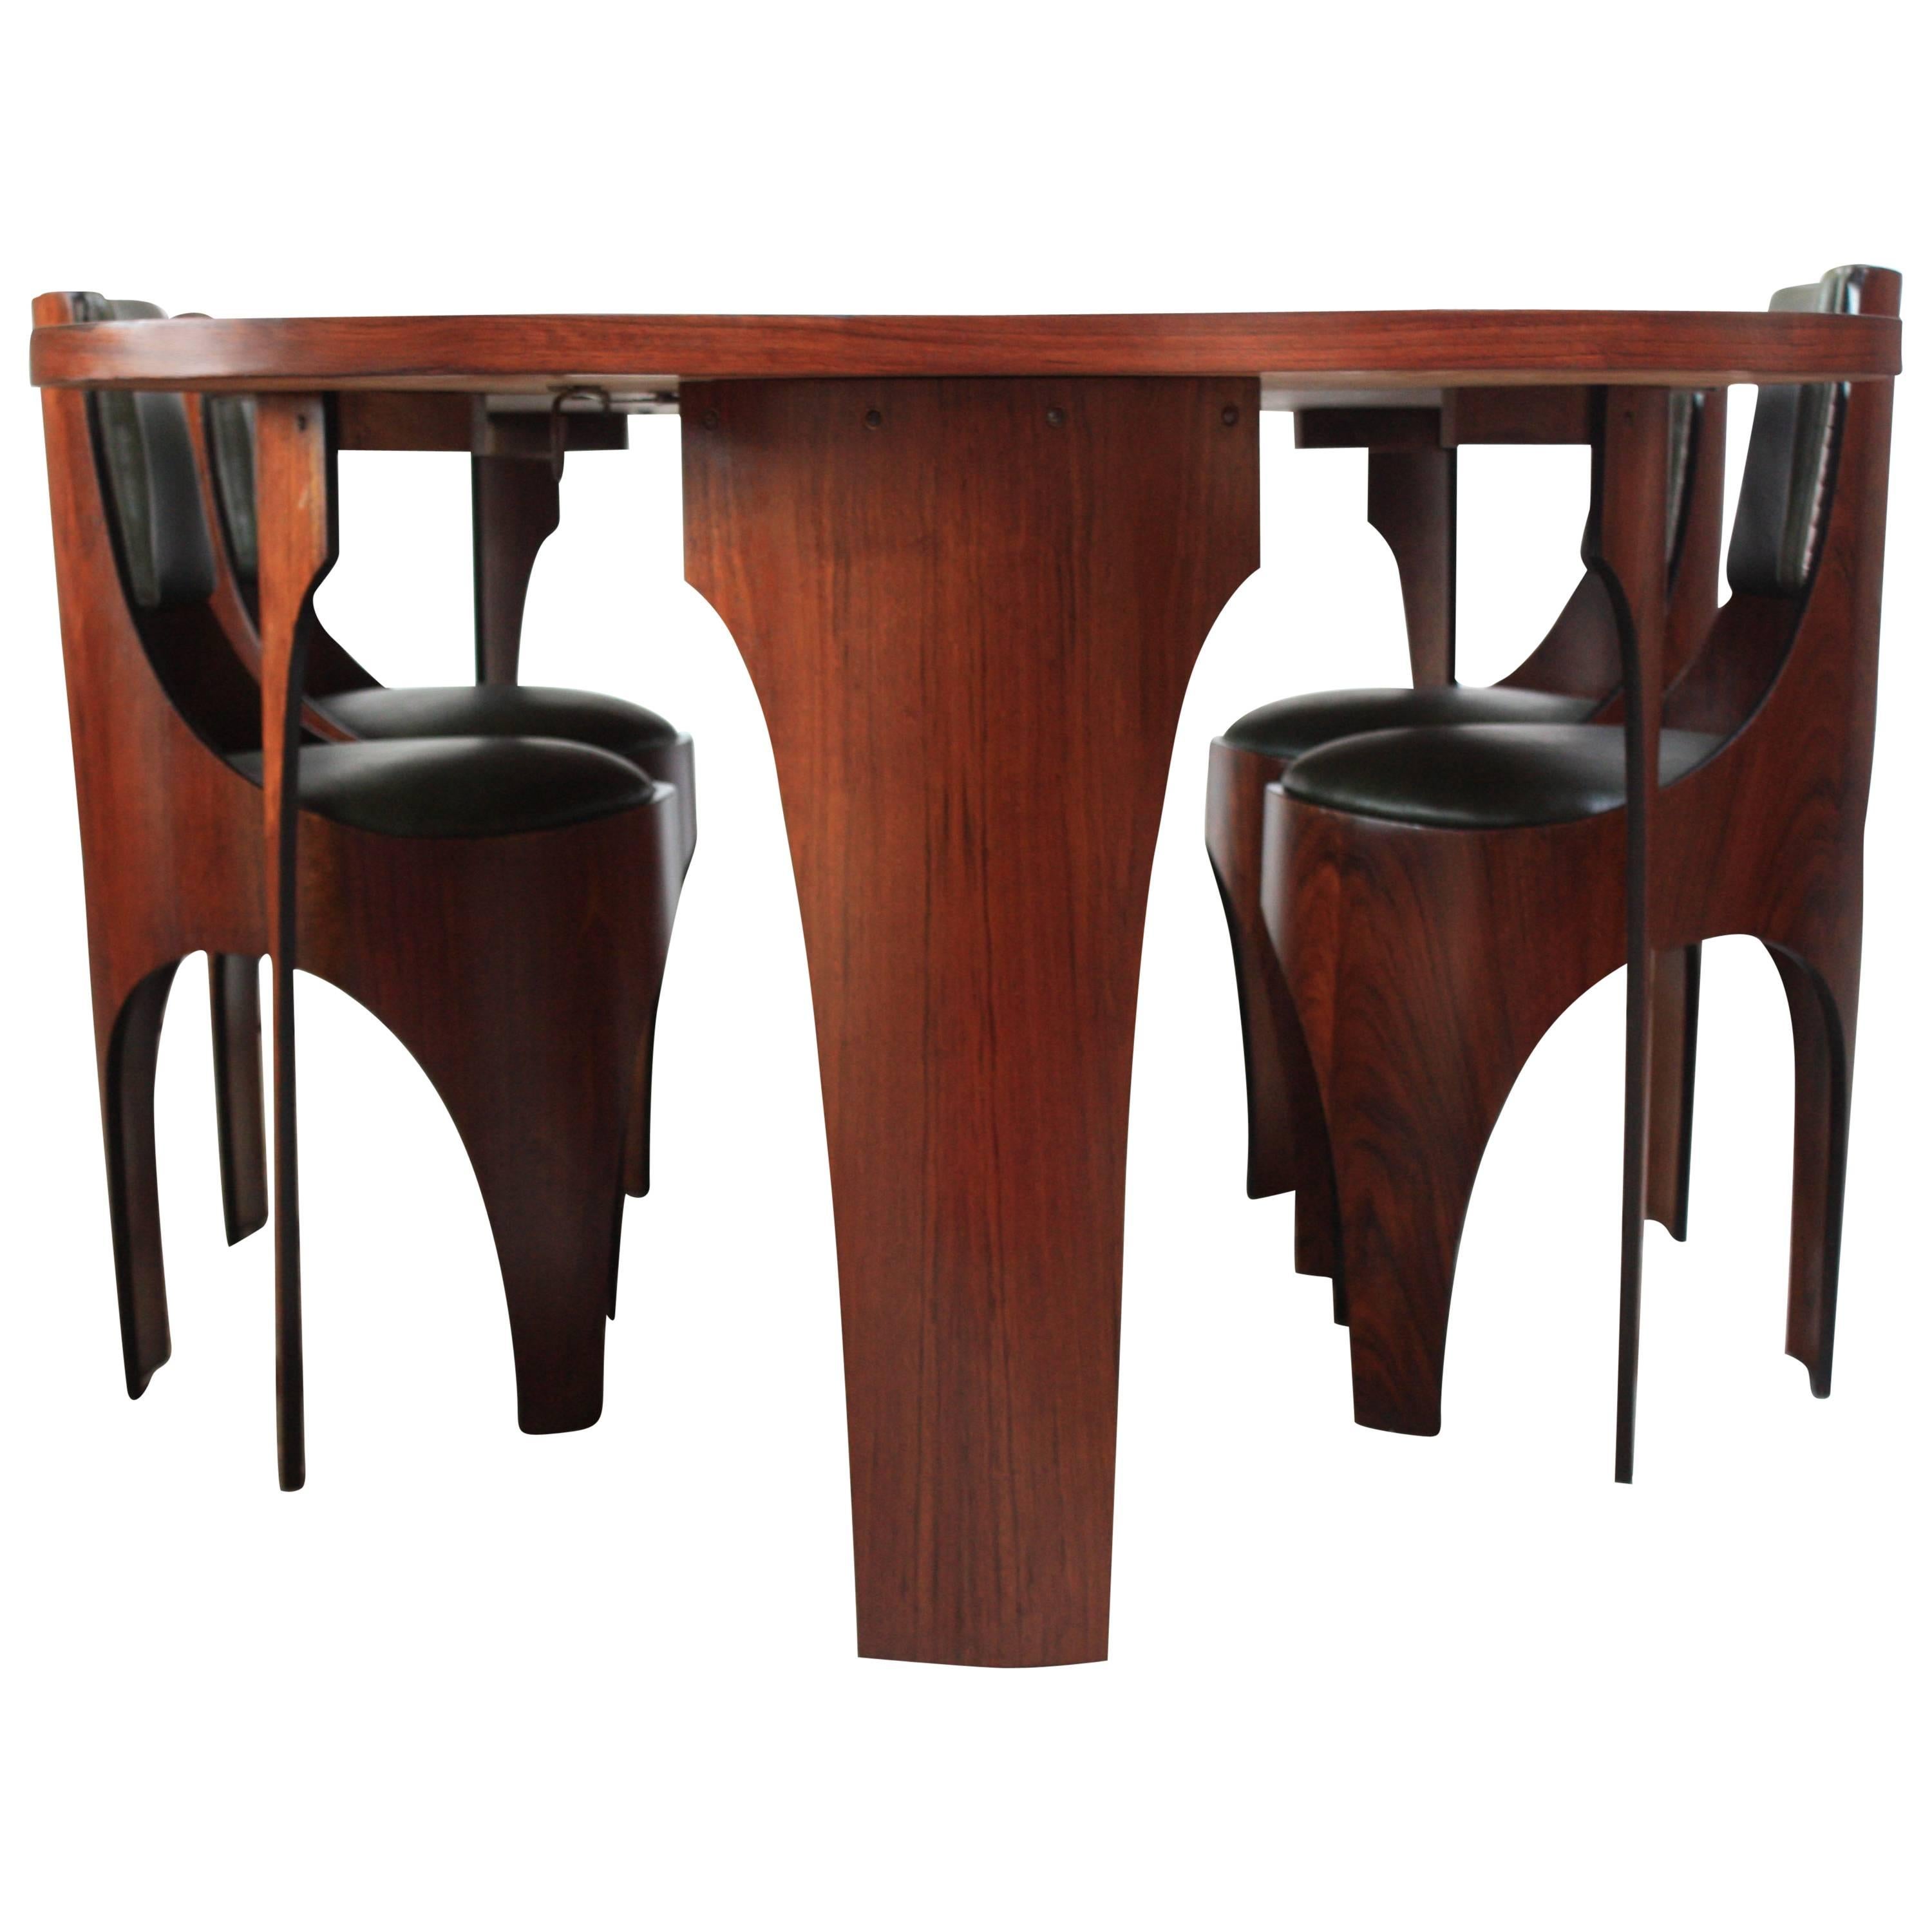 Henry Glass 'Cylindra' Walnut Extendable Dining Table and Four Chairs